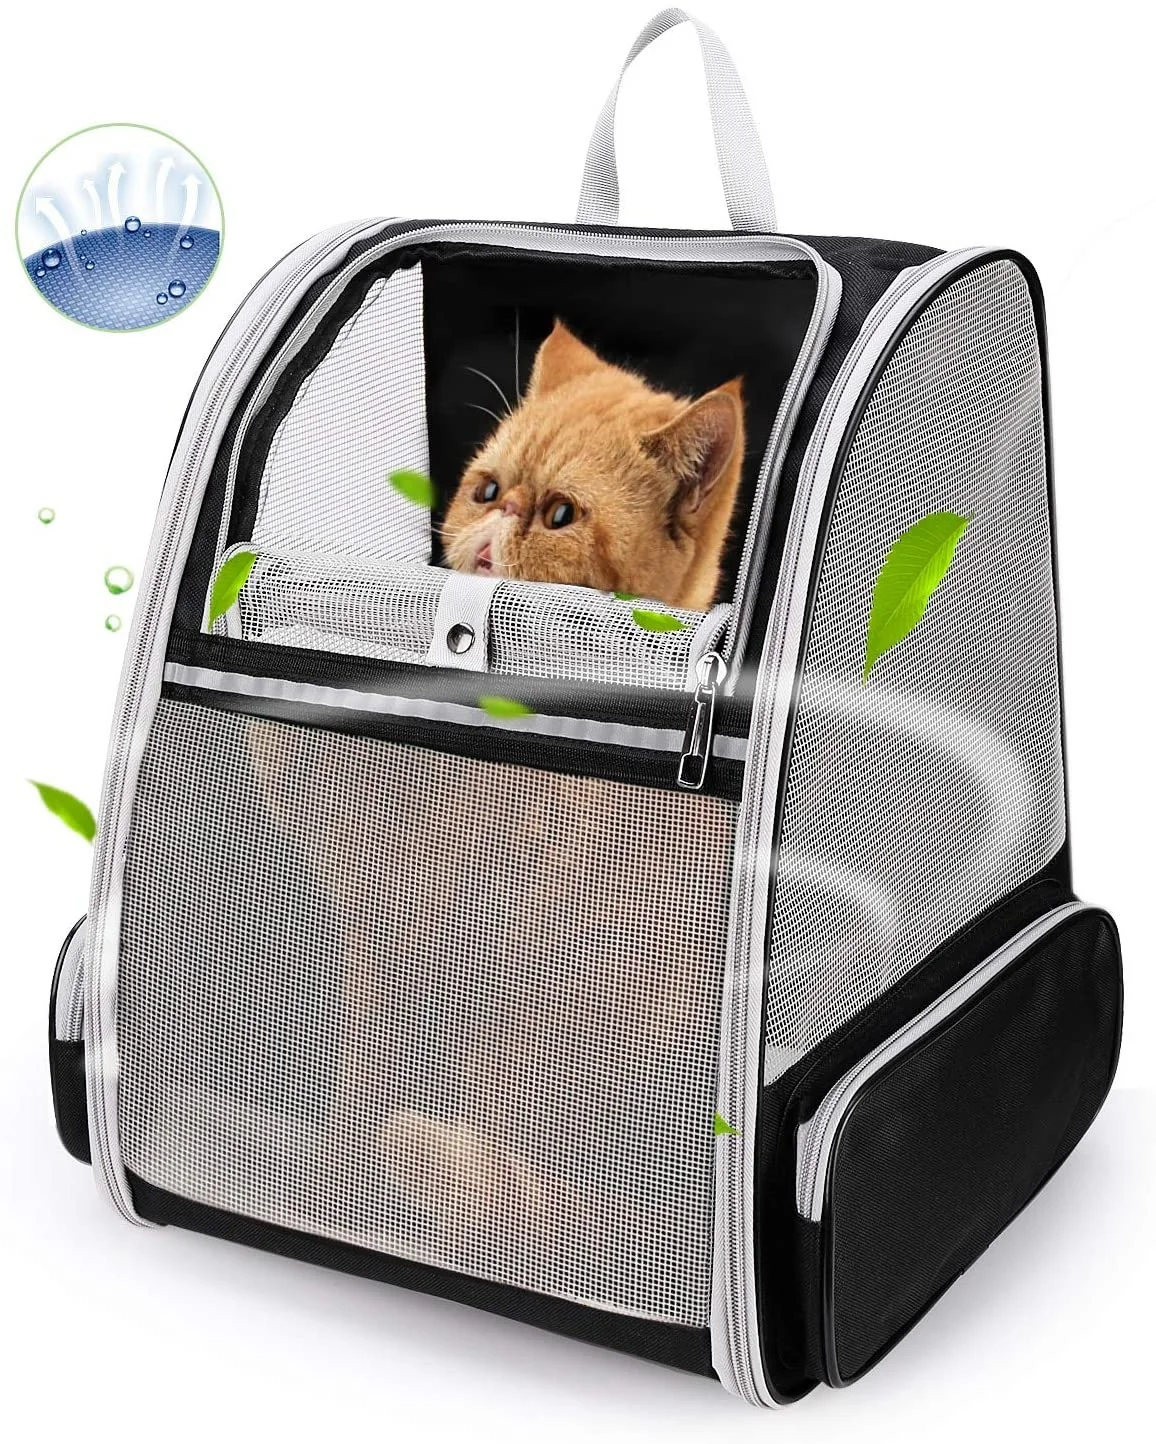 

Pet Carrier Expandable with Breathable Mesh for Small Dogs Cats Puppies Pet Backpack Bag, Black, blue, green, purple, yellow